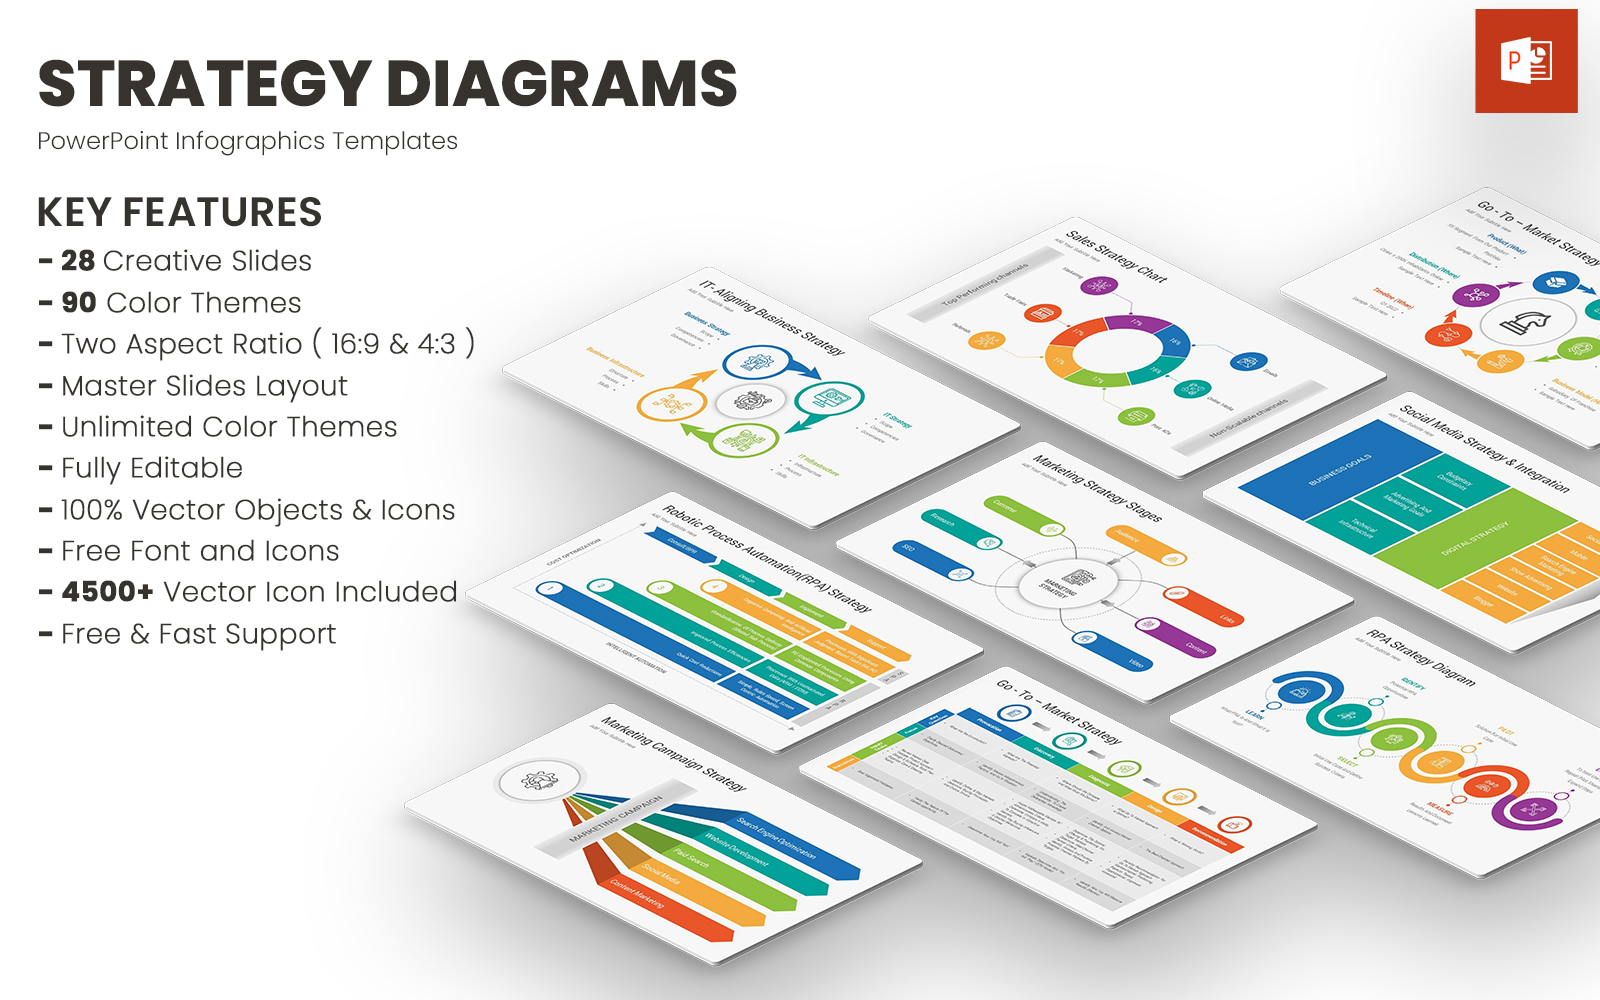 Strategy Diagrams PowerPoint Templates